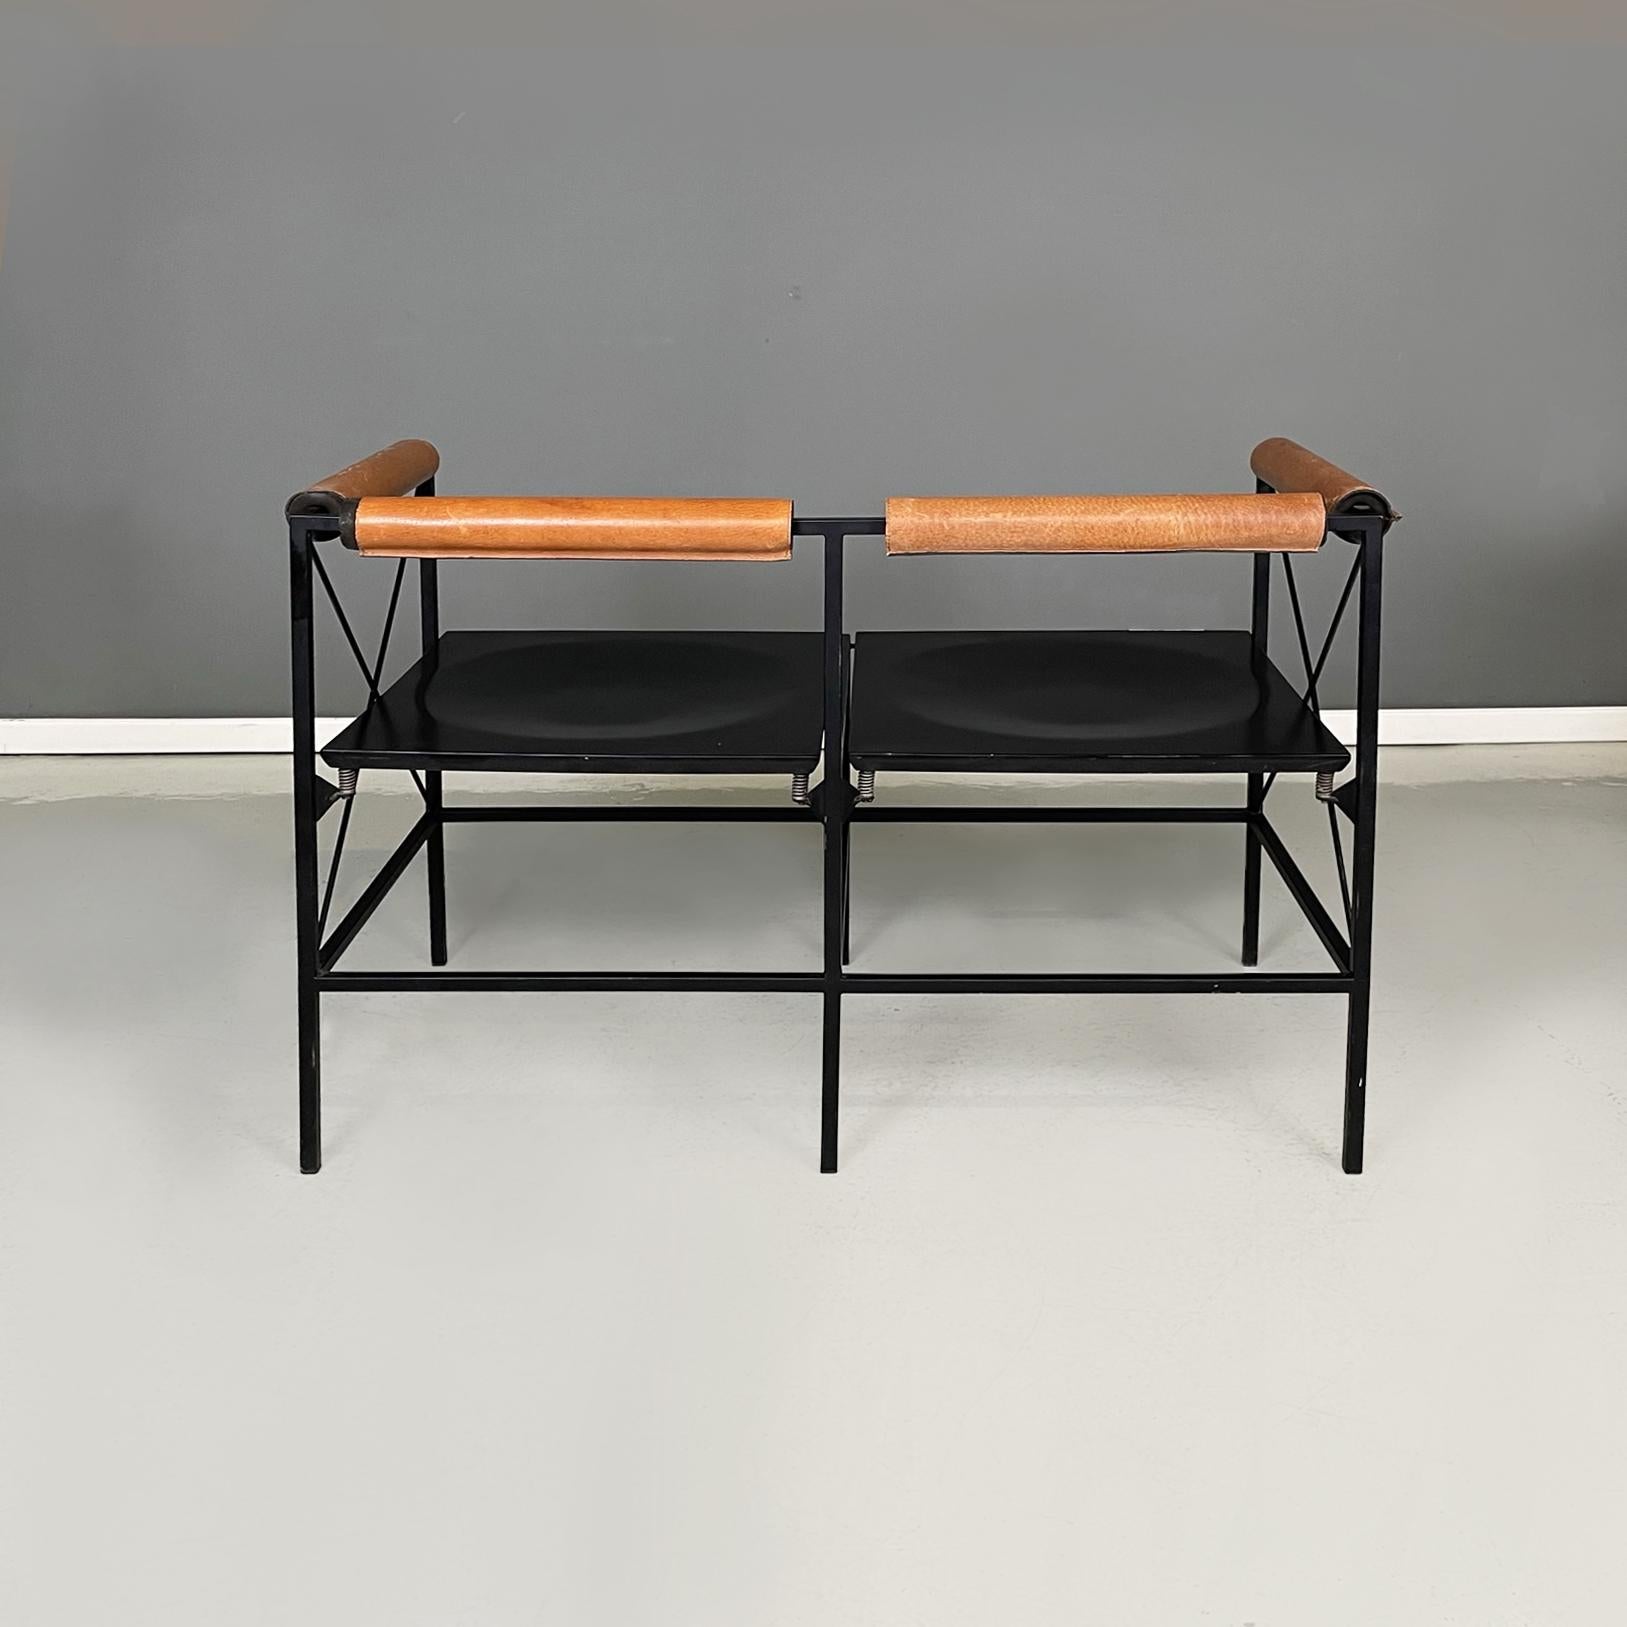 Late 20th Century Italian modern black metal wood brown leather 2seater benches Felicerossi, 1980s